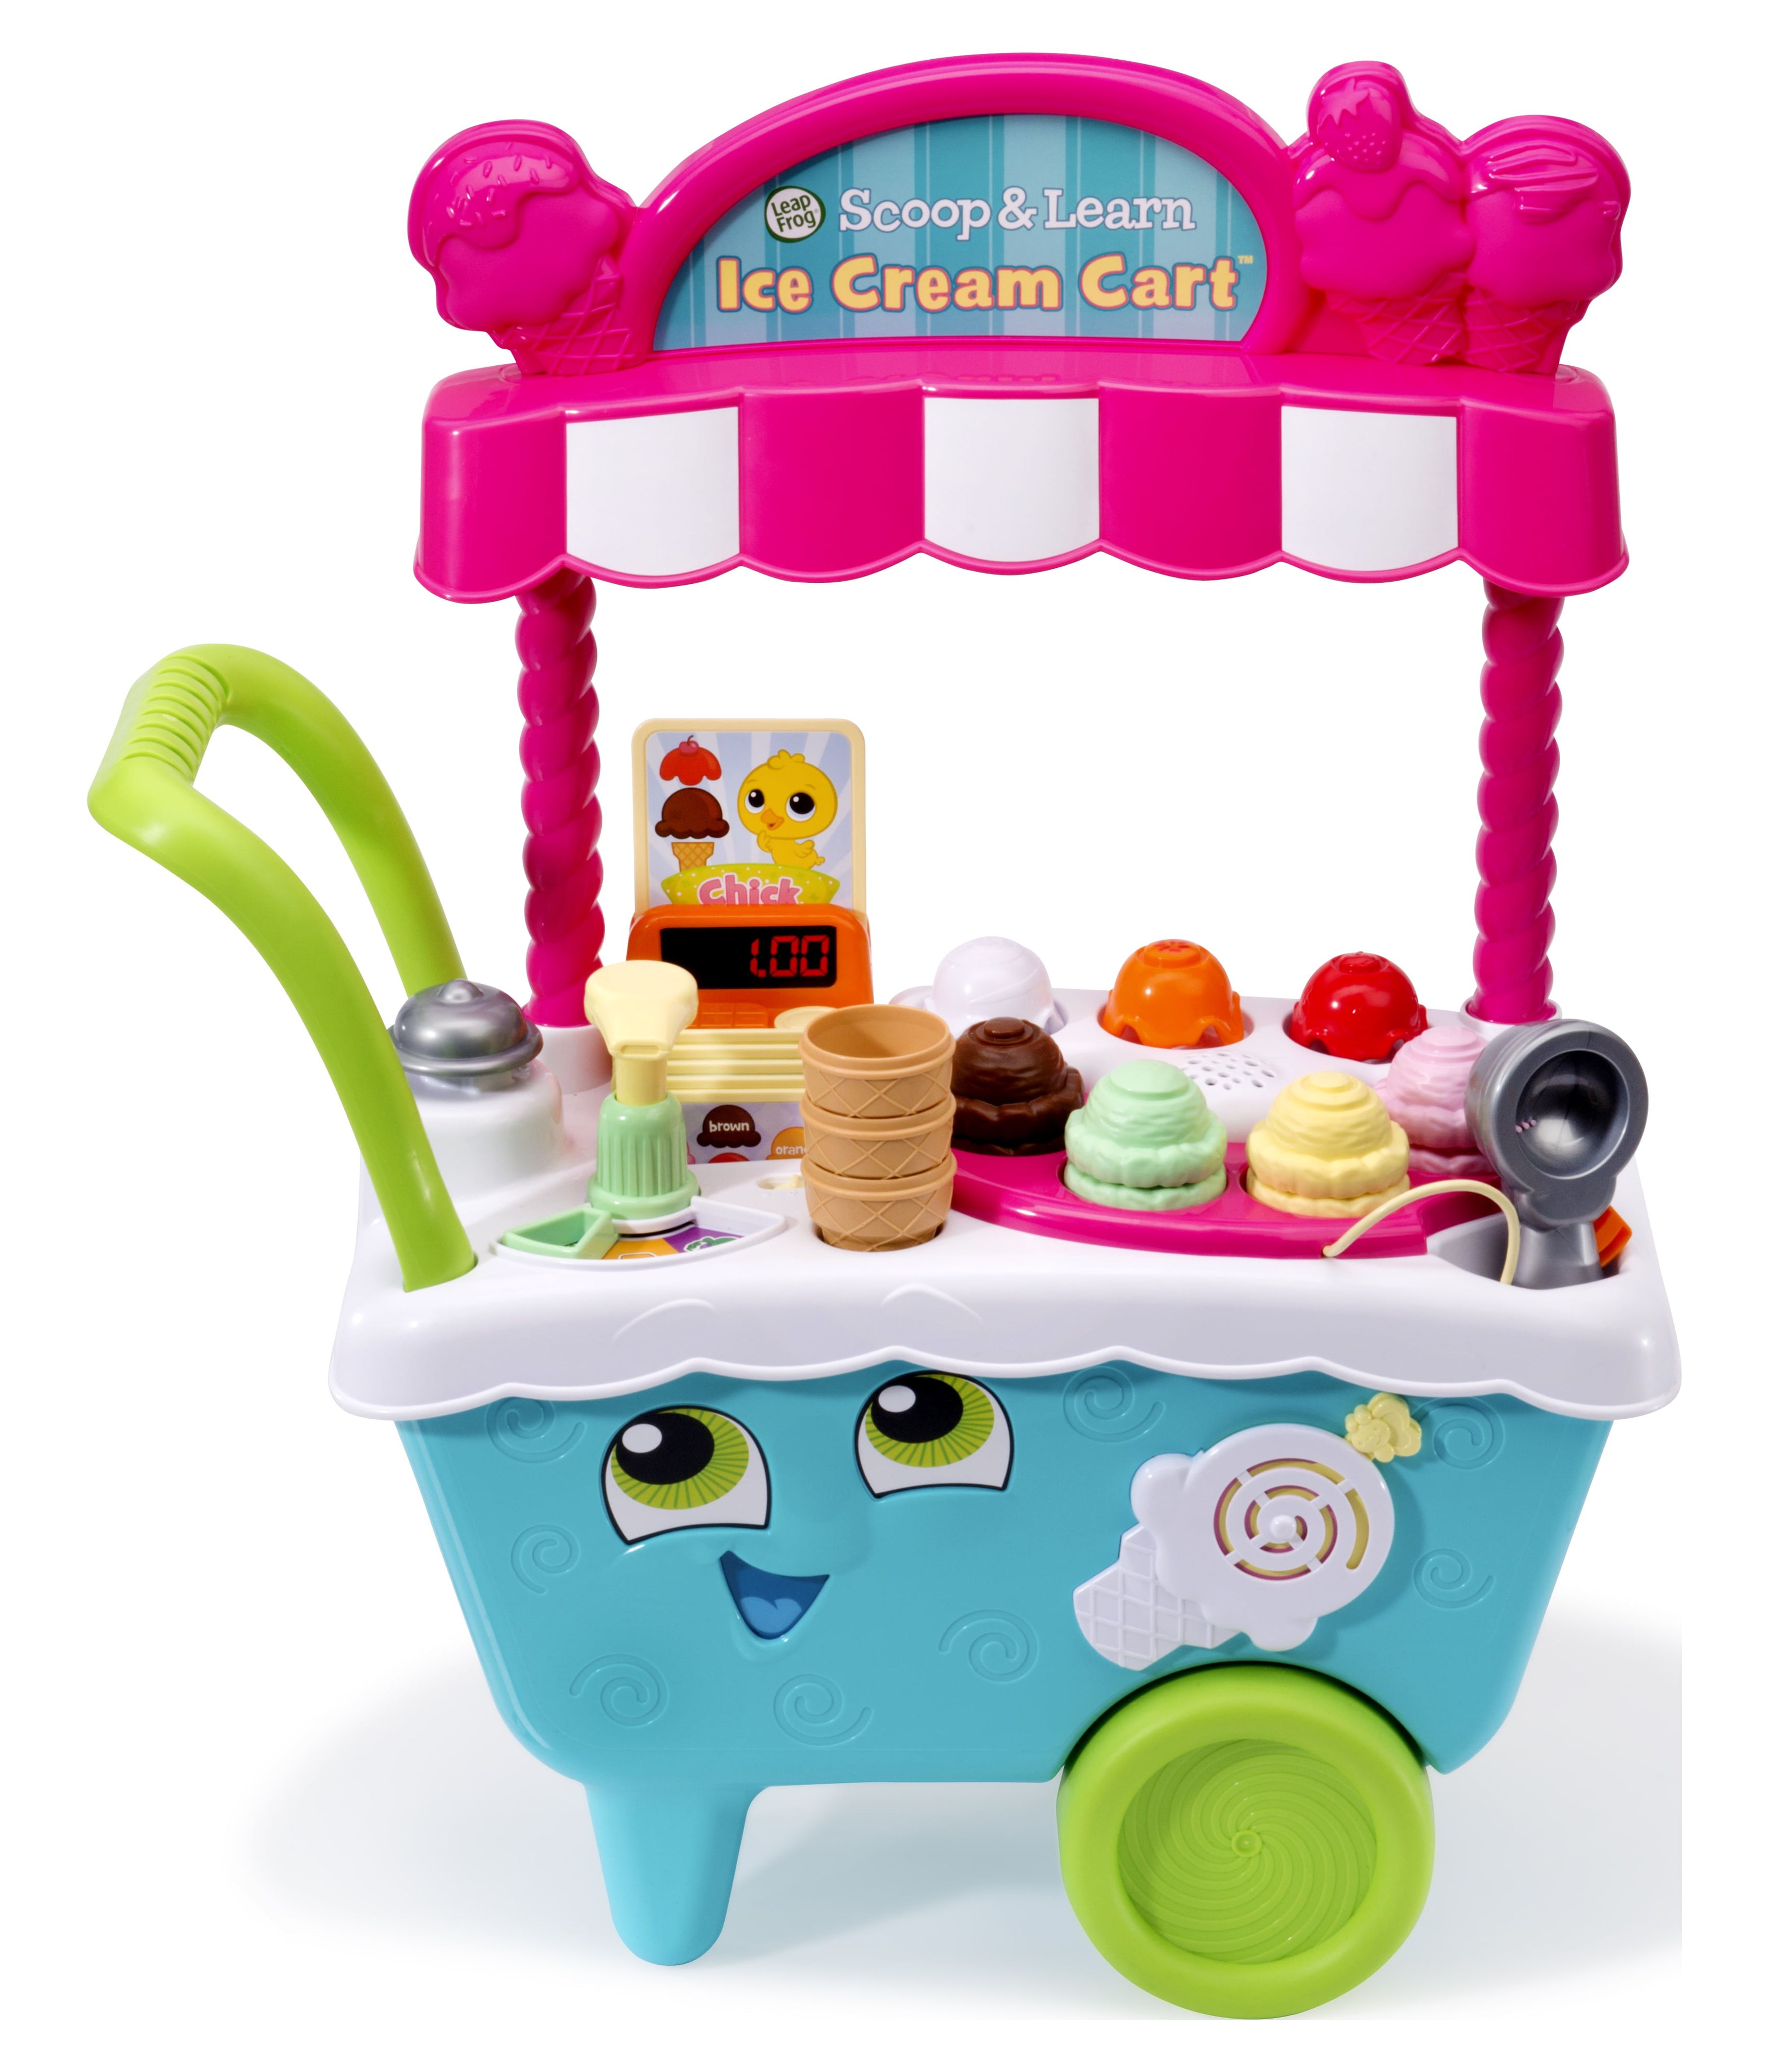 LeapFrog Scoop and Learn Ice Cream Cart, Multi-Color Play Kitchen Toy for Kids - image 1 of 20